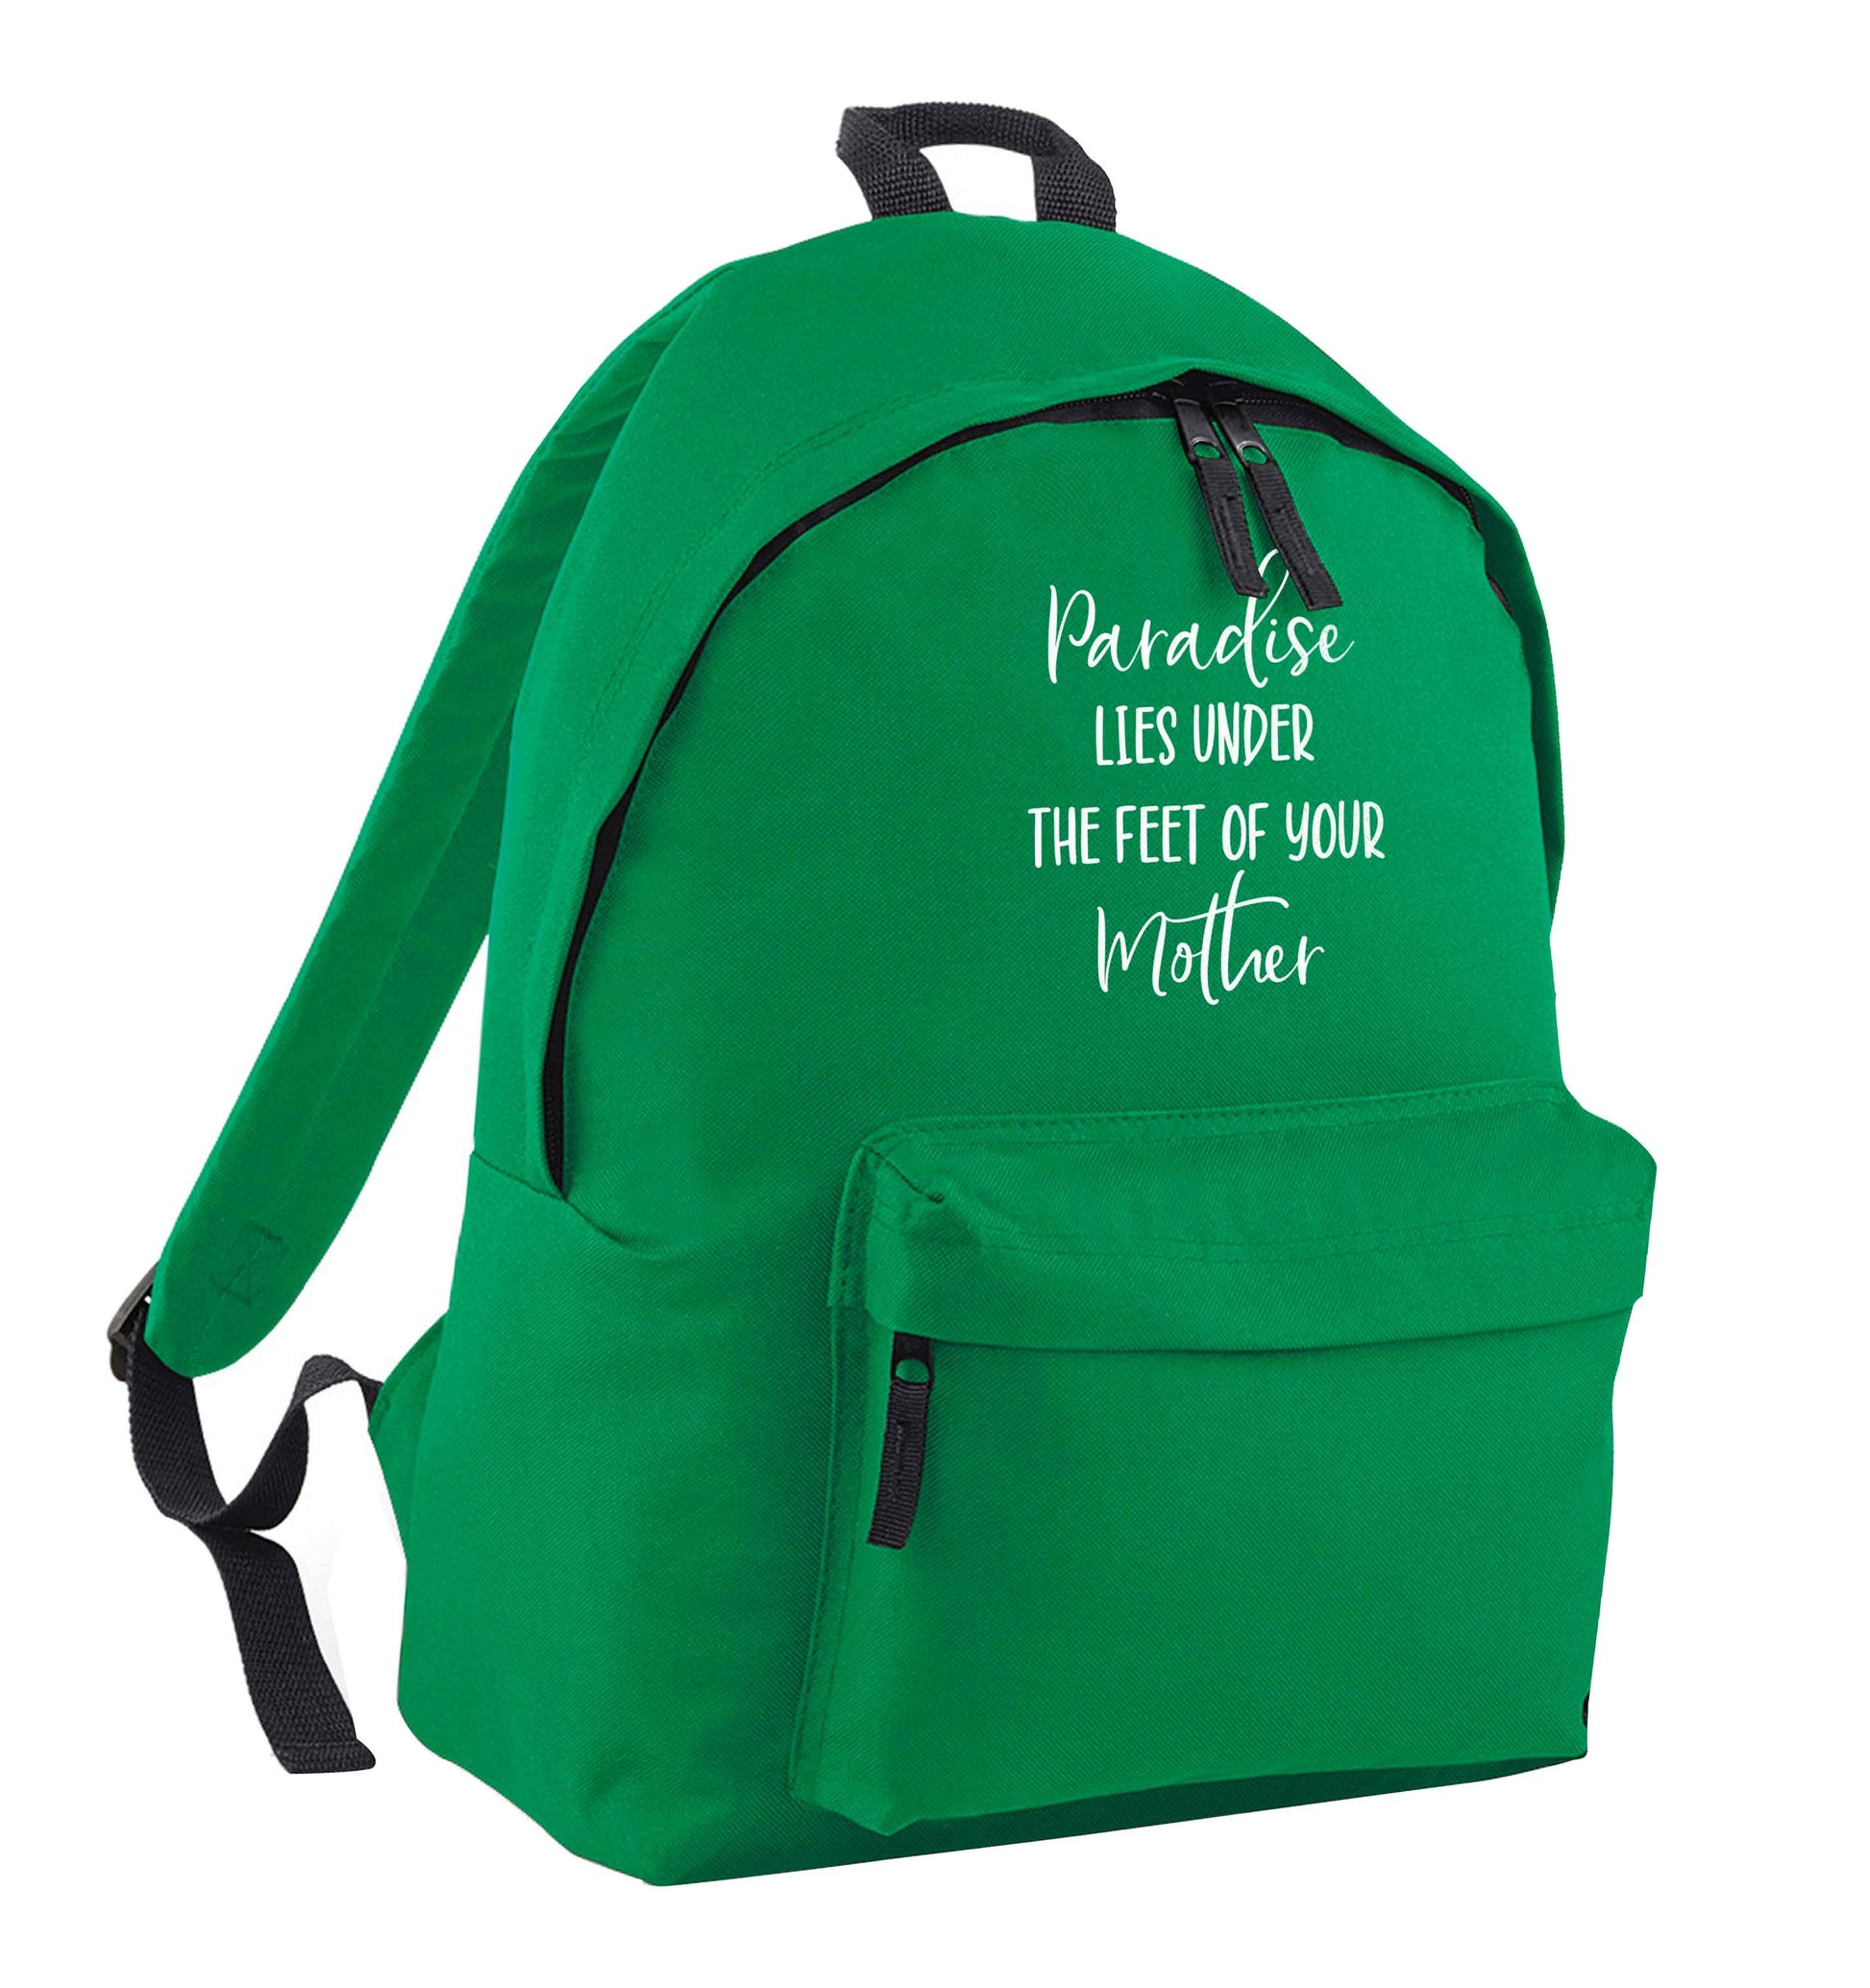 Paradise lies under the feet of your mother green adults backpack